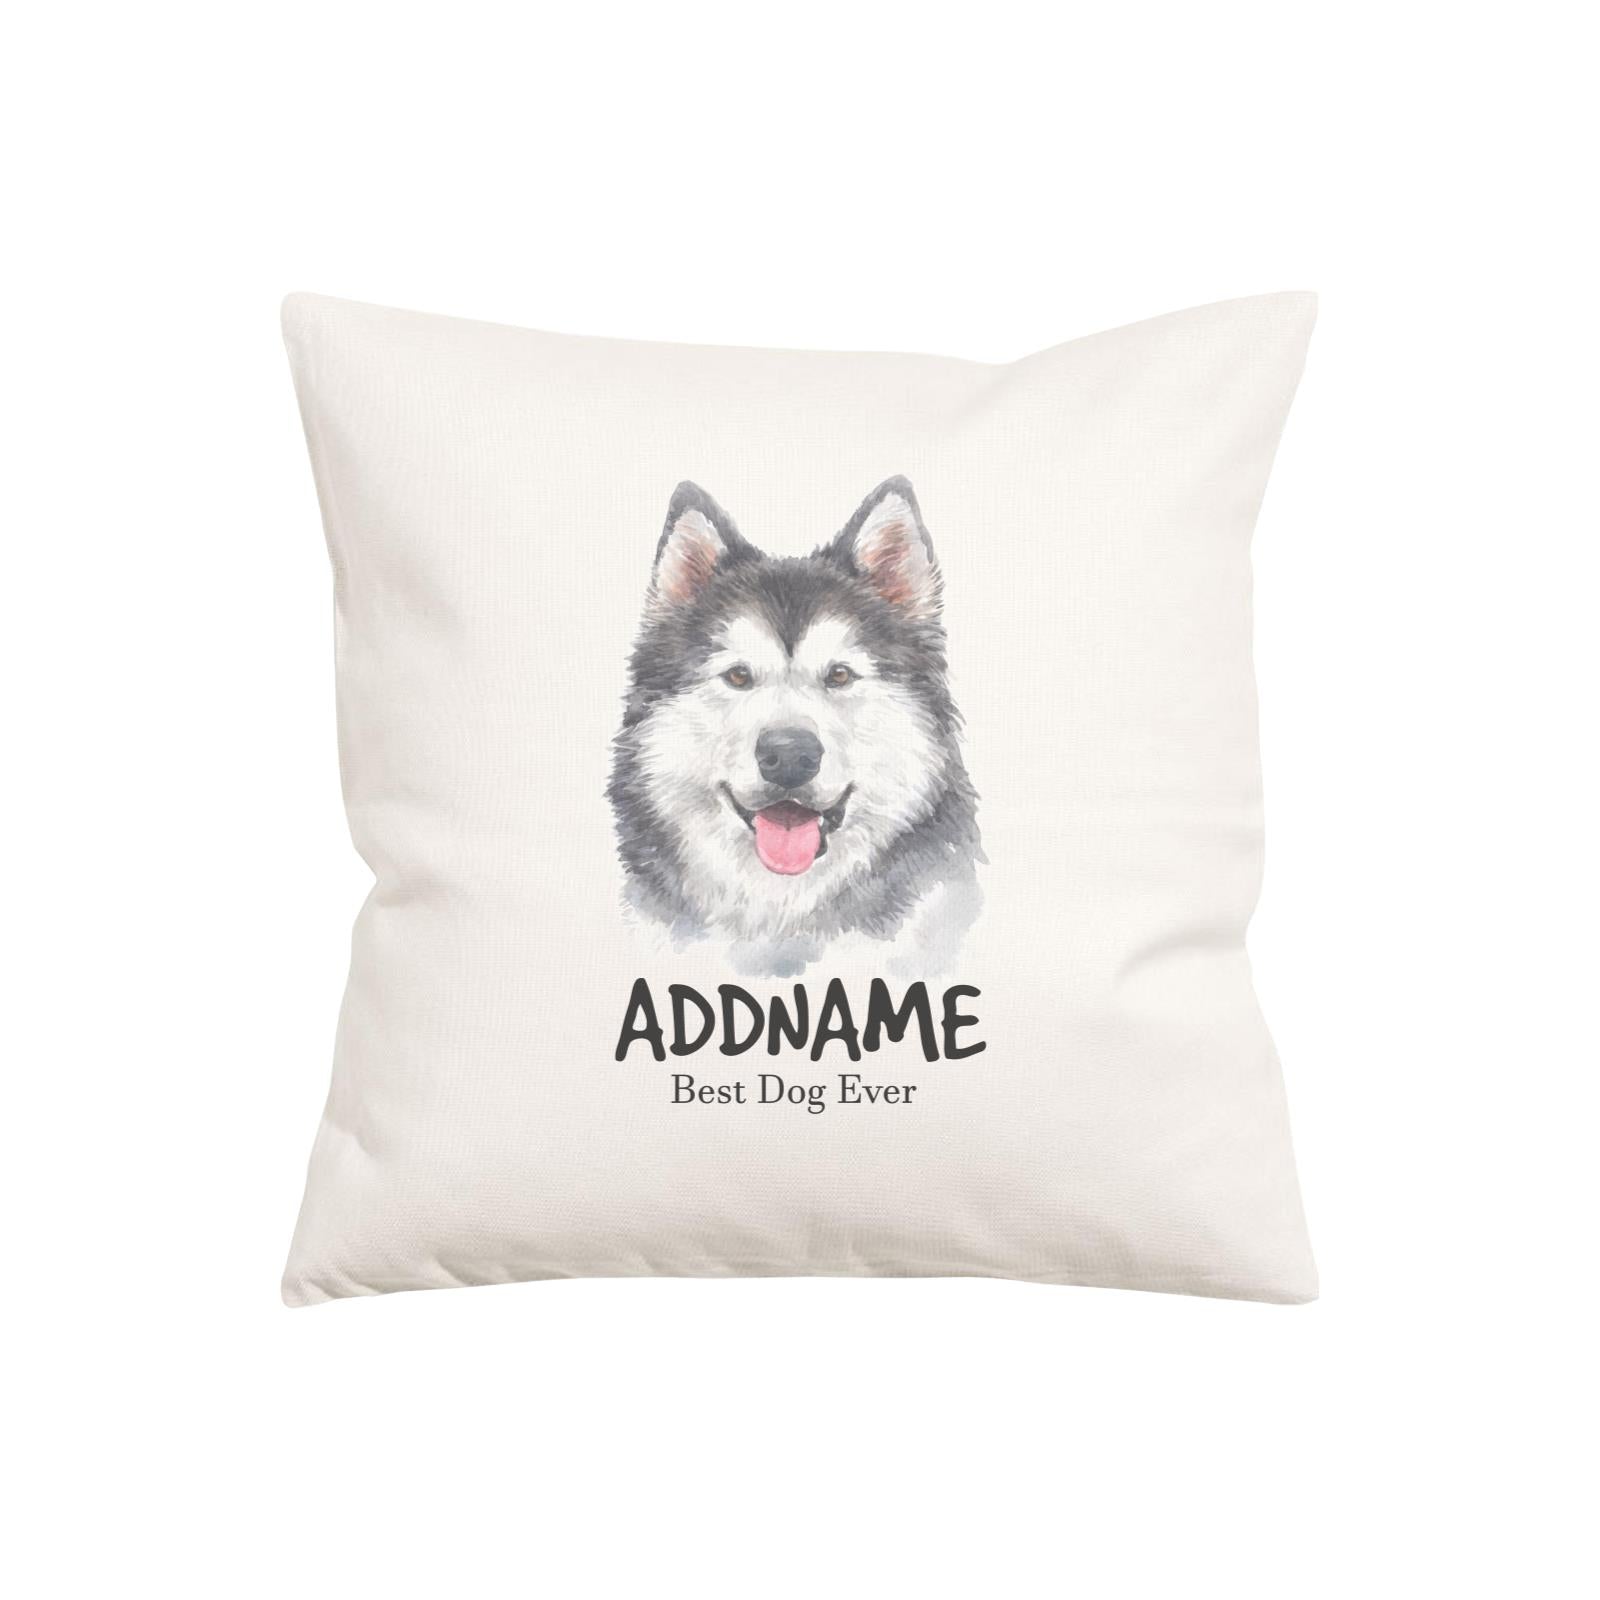 Watercolor Dog Series Siberian Husky smile Best Dog Ever Addname Pillow Cushion